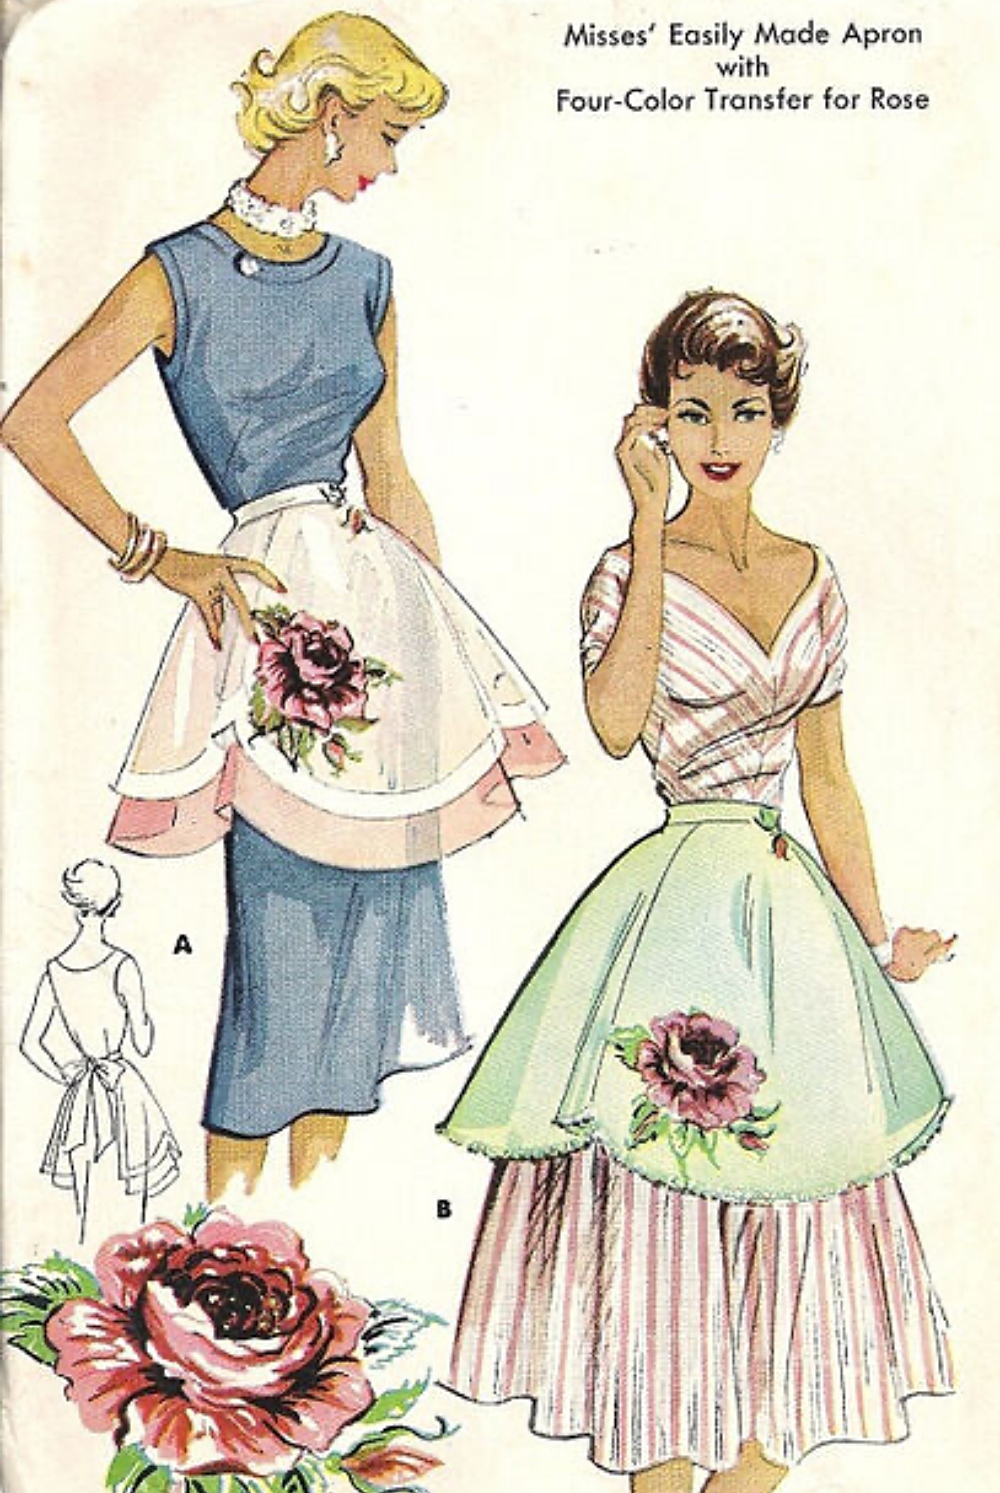 1950s housewife hostess apron pattern